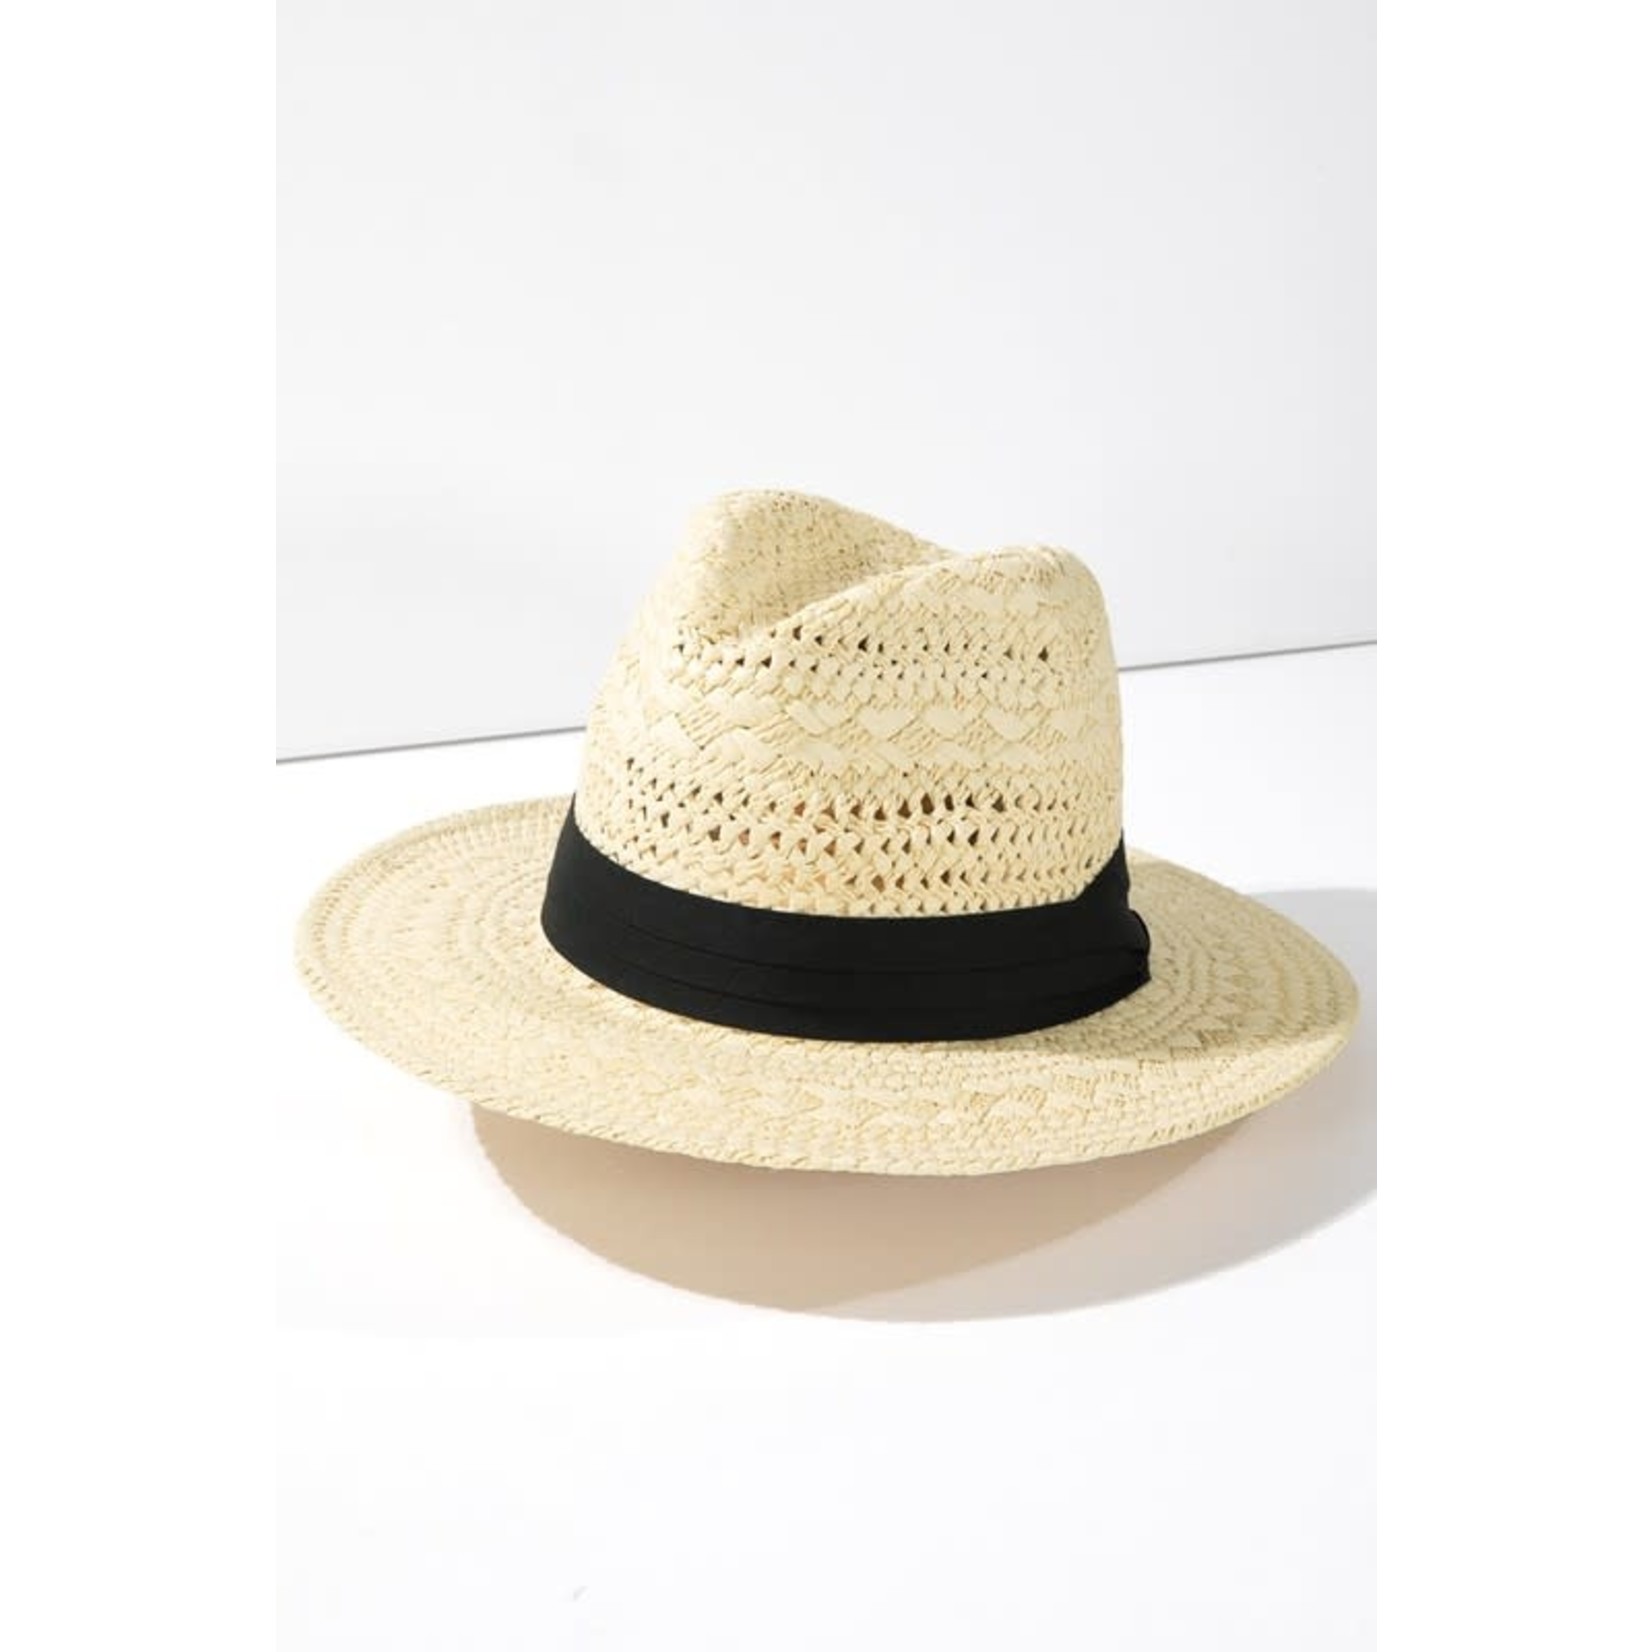 Patty Woven Hat with Black Detail